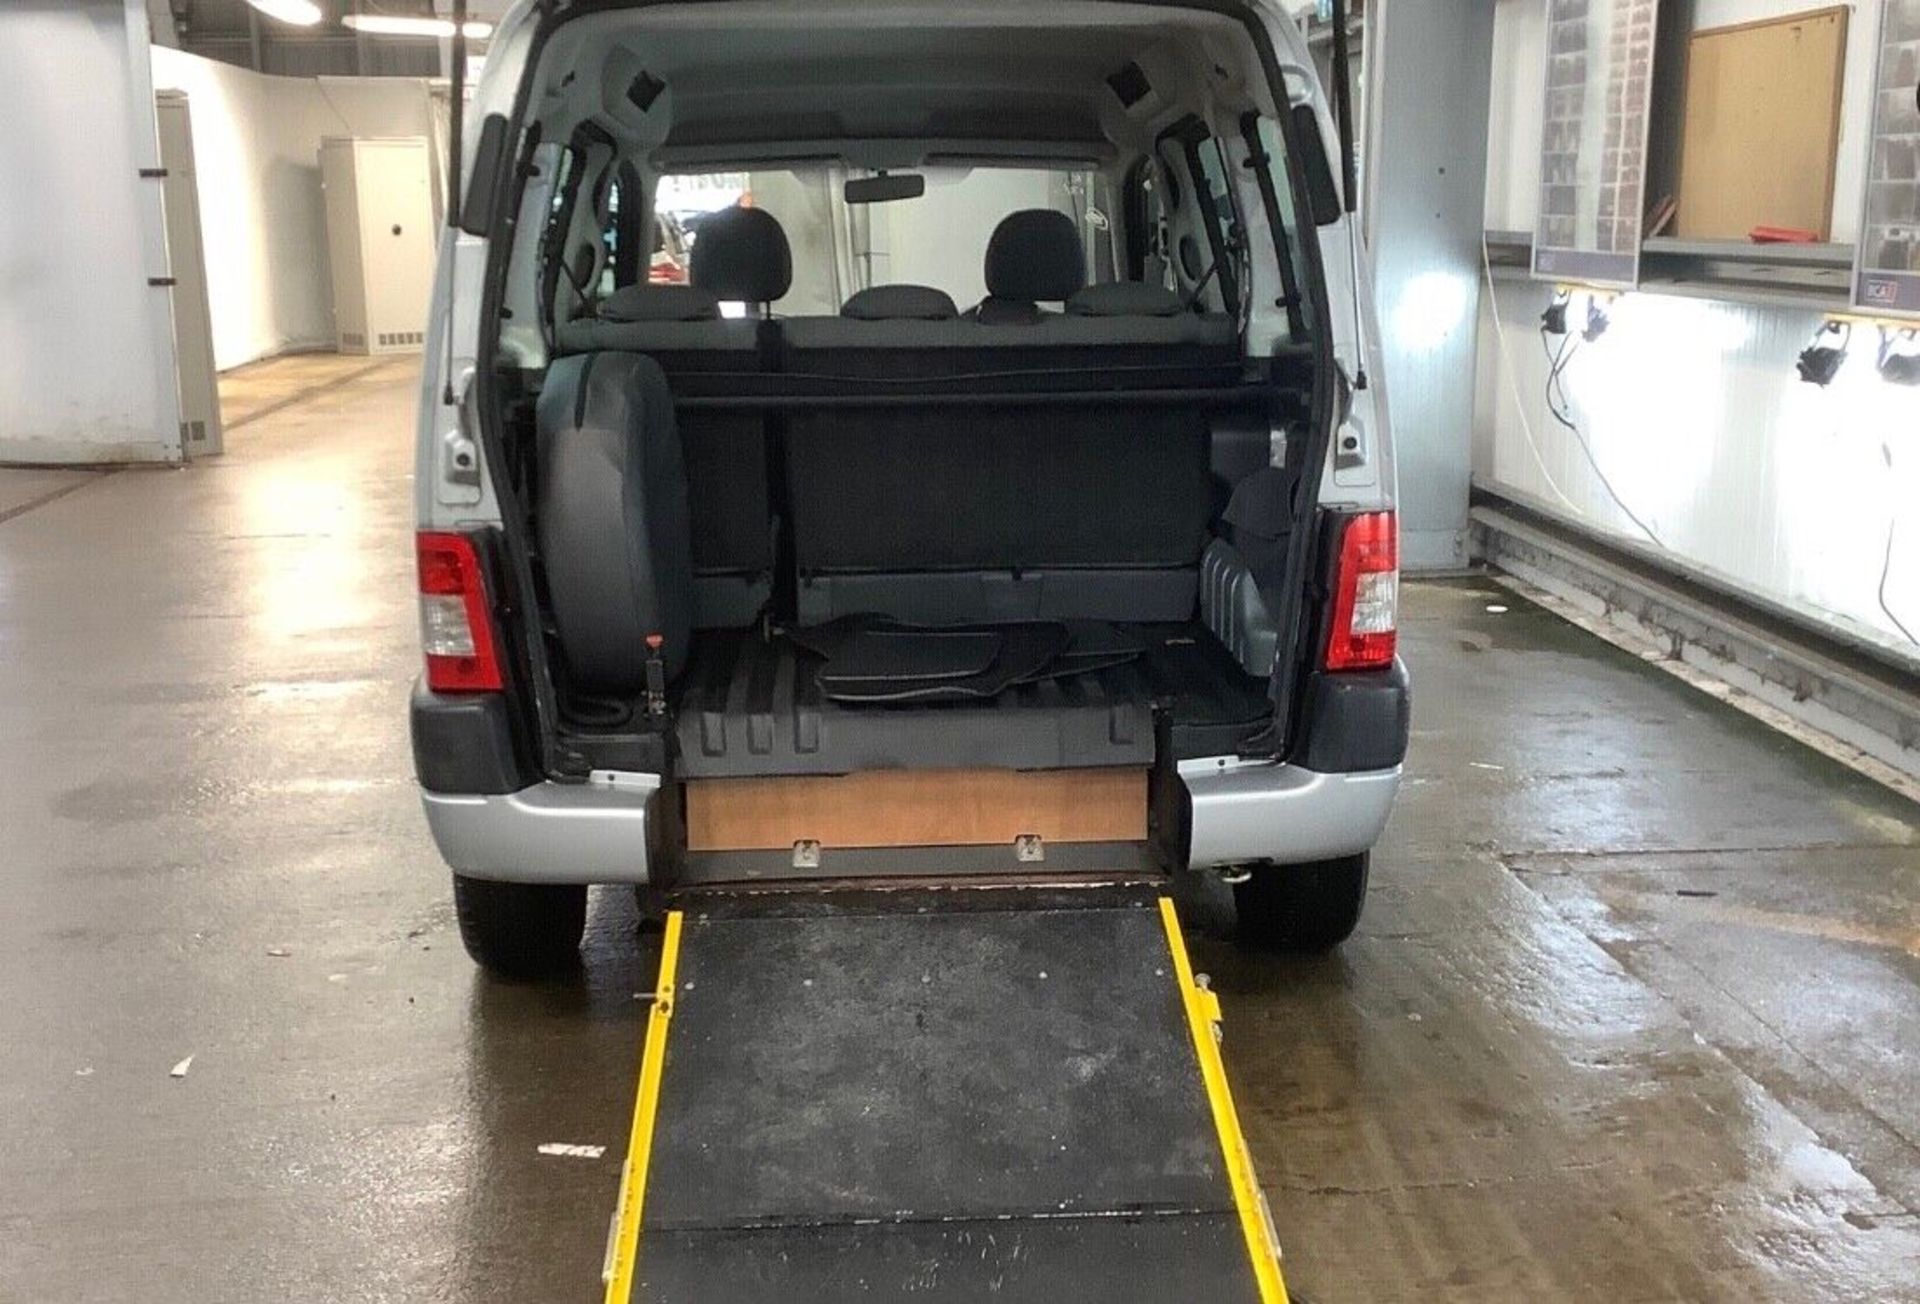 2008/57 PEUGEOT PARTNER COMBI 1.4 MANUAL WHEELCHAIR ACCESSIBLE VEHICLE - Image 6 of 7